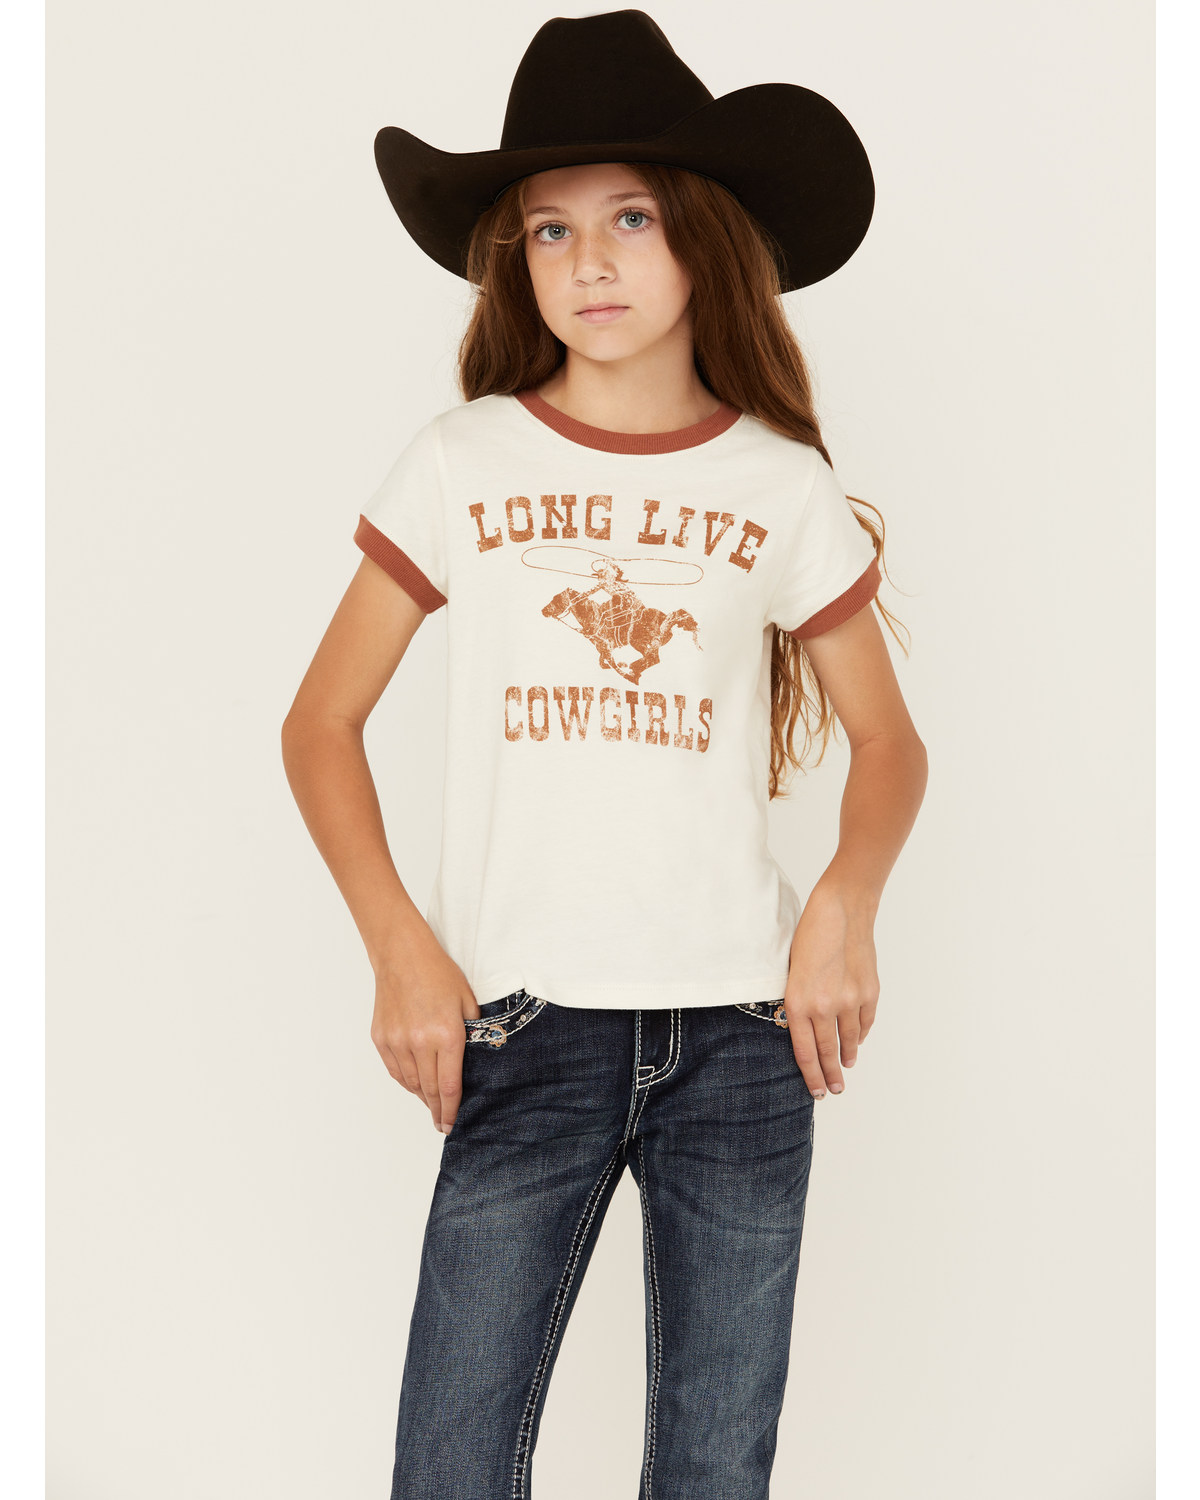 Shyanne Girls' Long Live Cowgirls Short Sleeve Graphic Ringer Tee